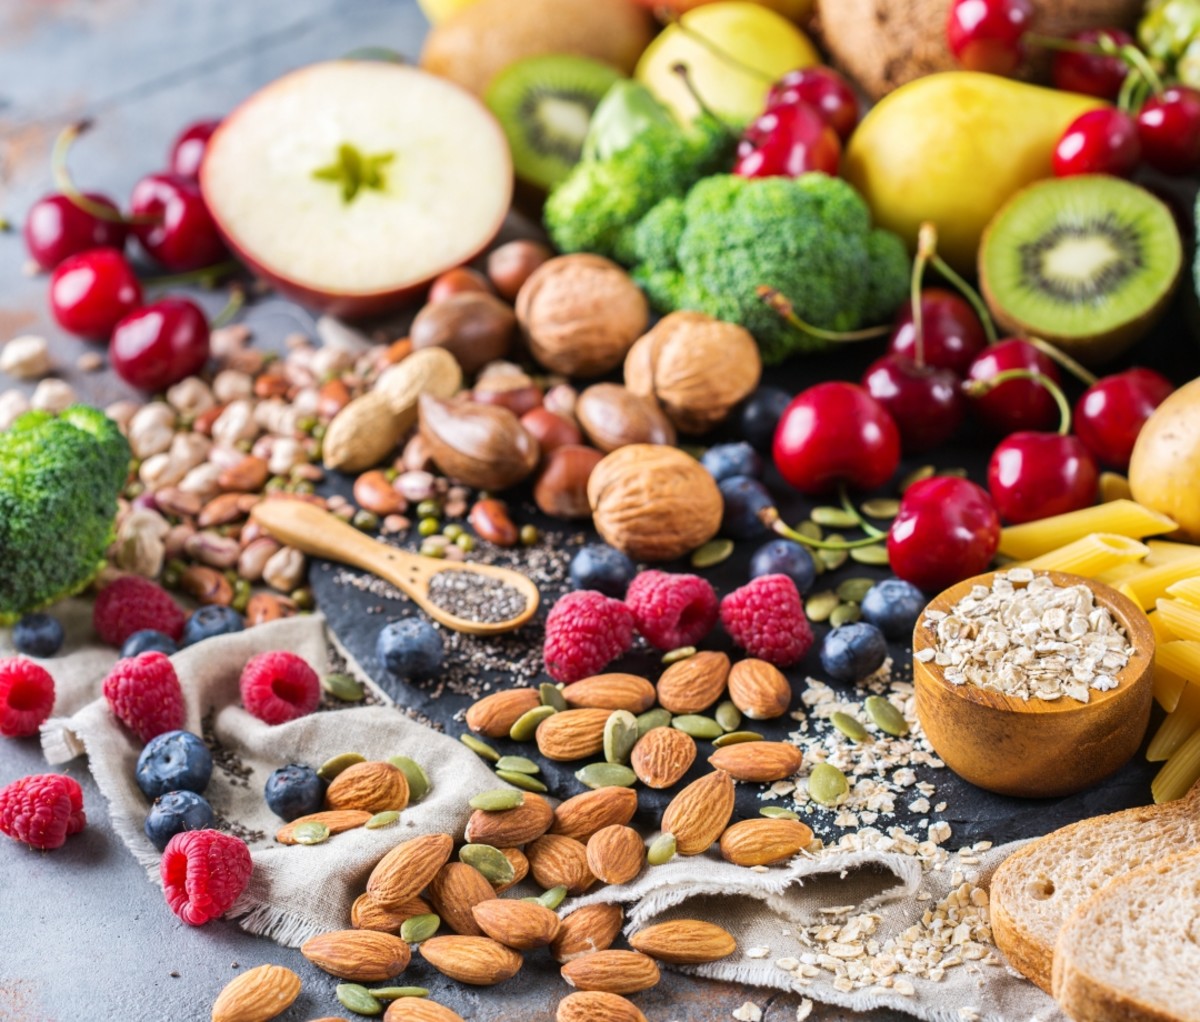 Fruits, nuts, vegetables and pasta spilling on a table. fitness tips